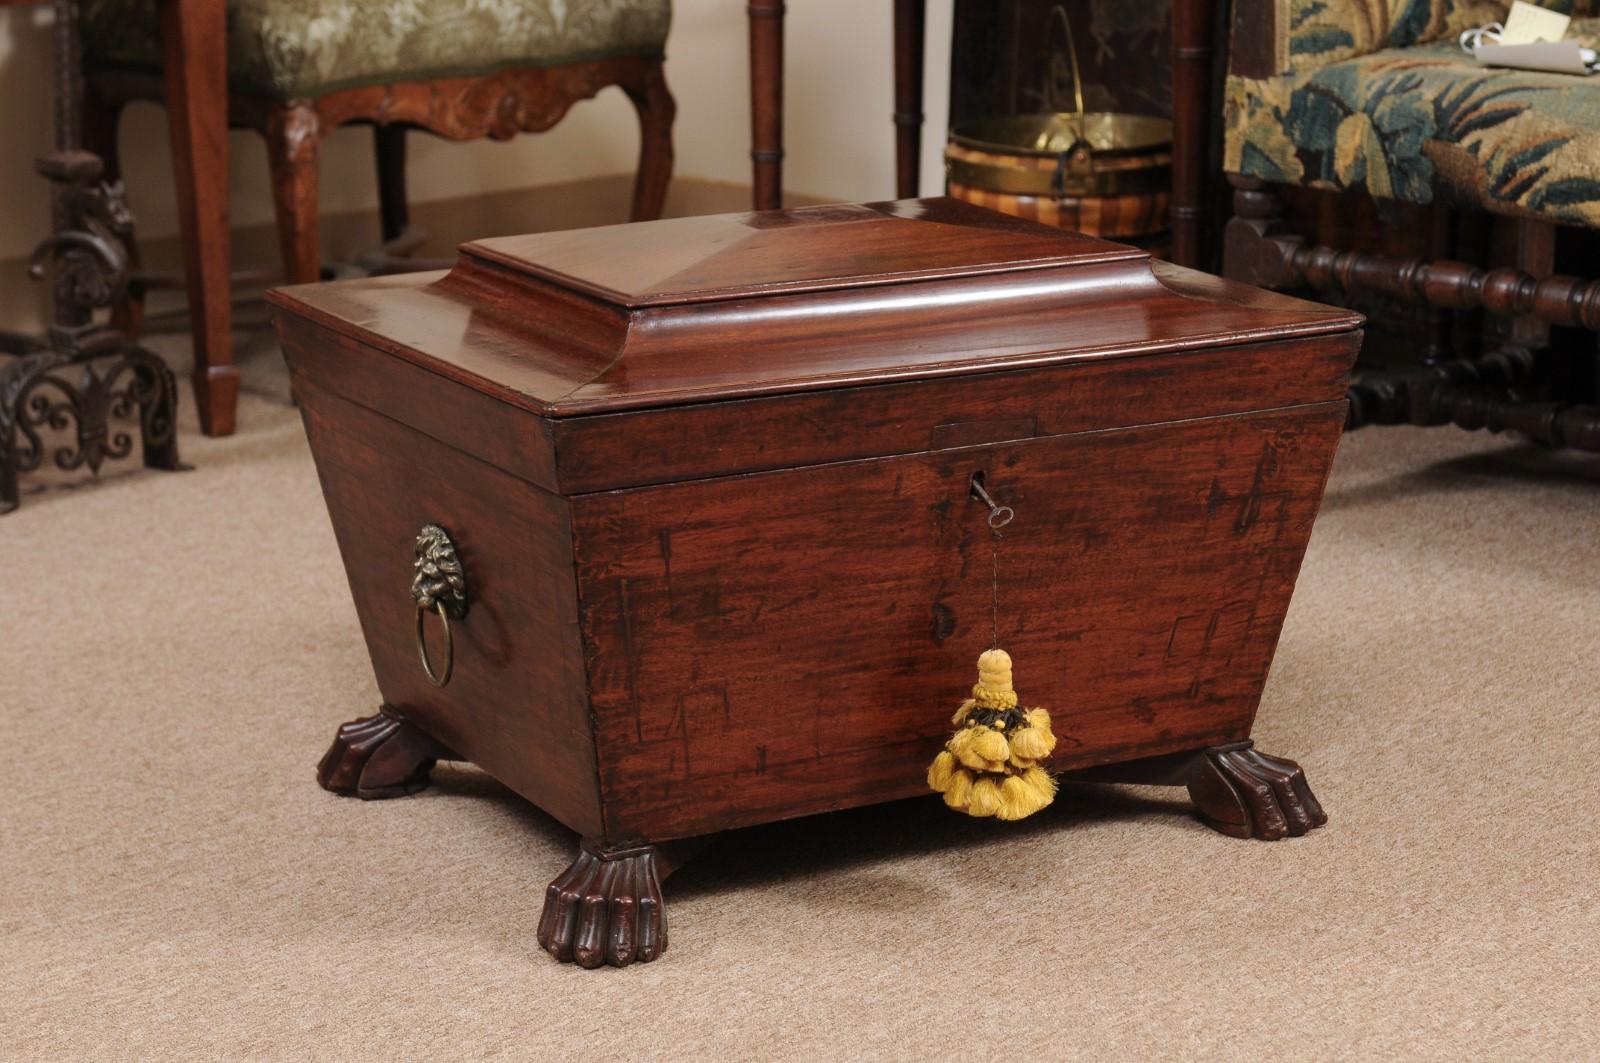 Regency mahogany cellarette with sarcophagus-form, paw feet, and lion's head handles, 19th Century, England.